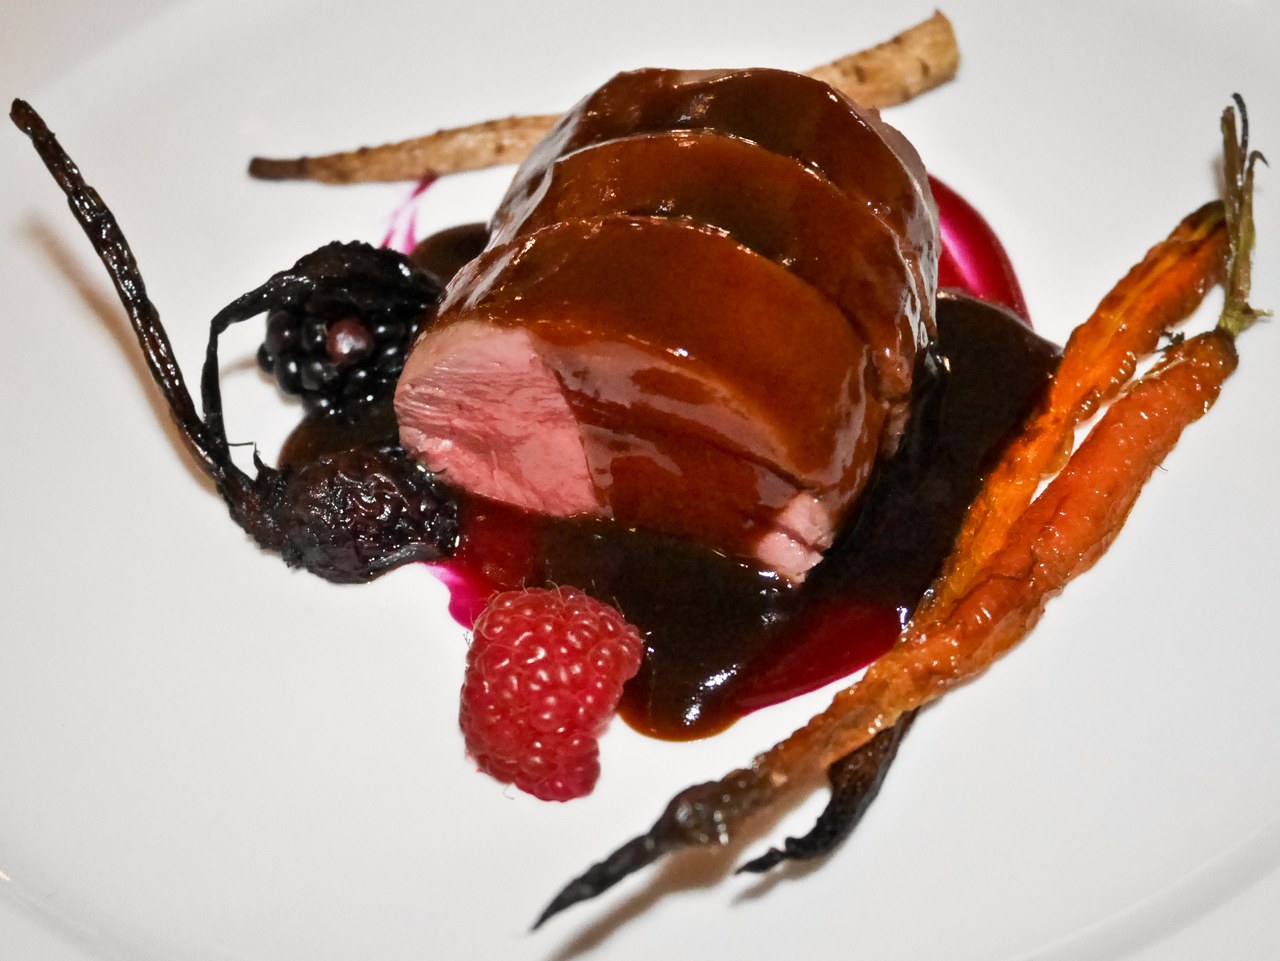 Carlton Saddle of deer with berries, carrot, parsnip and chocolate sauce